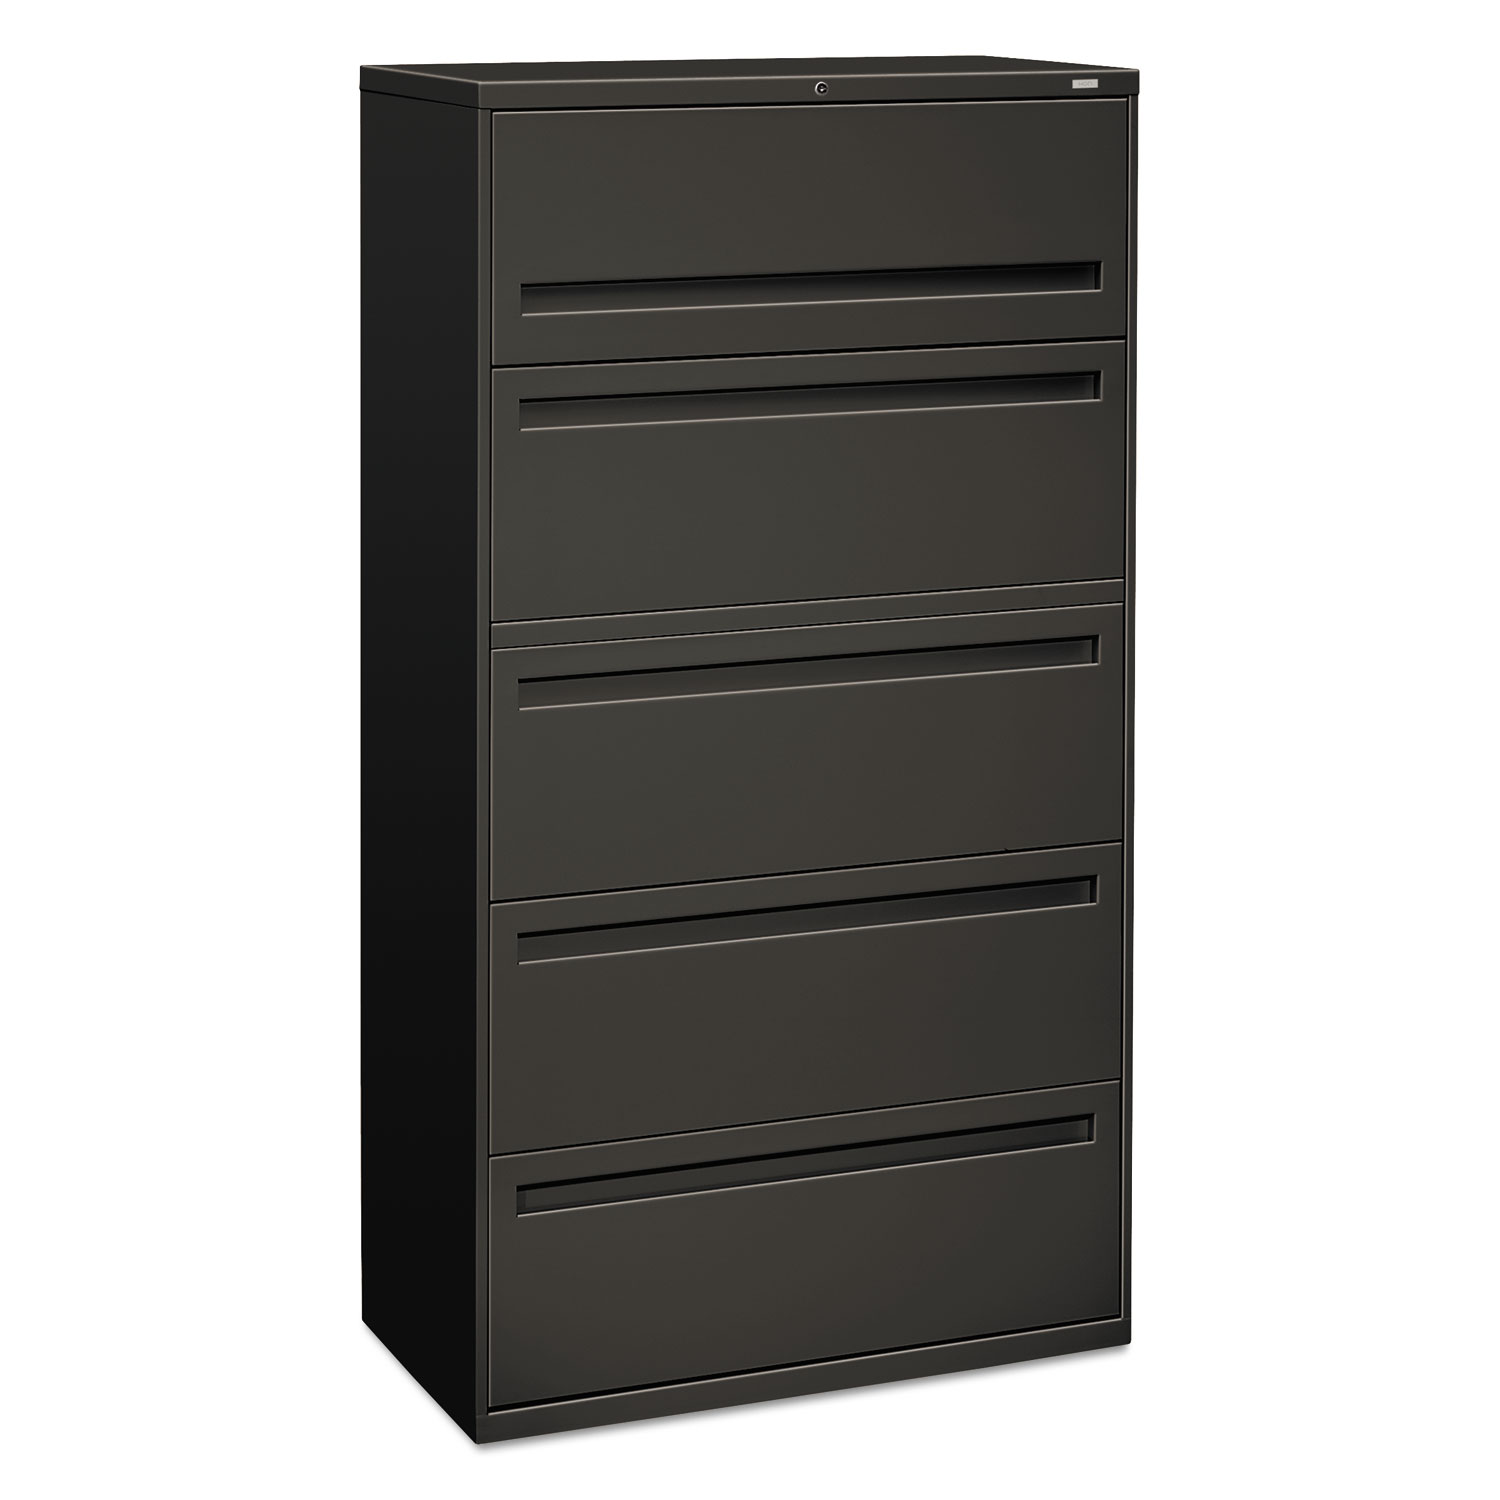 700 Series Five-Drawer Lateral File w/Roll-Out Shelf, 36w x 18d x 64 1/4h, Charcoal